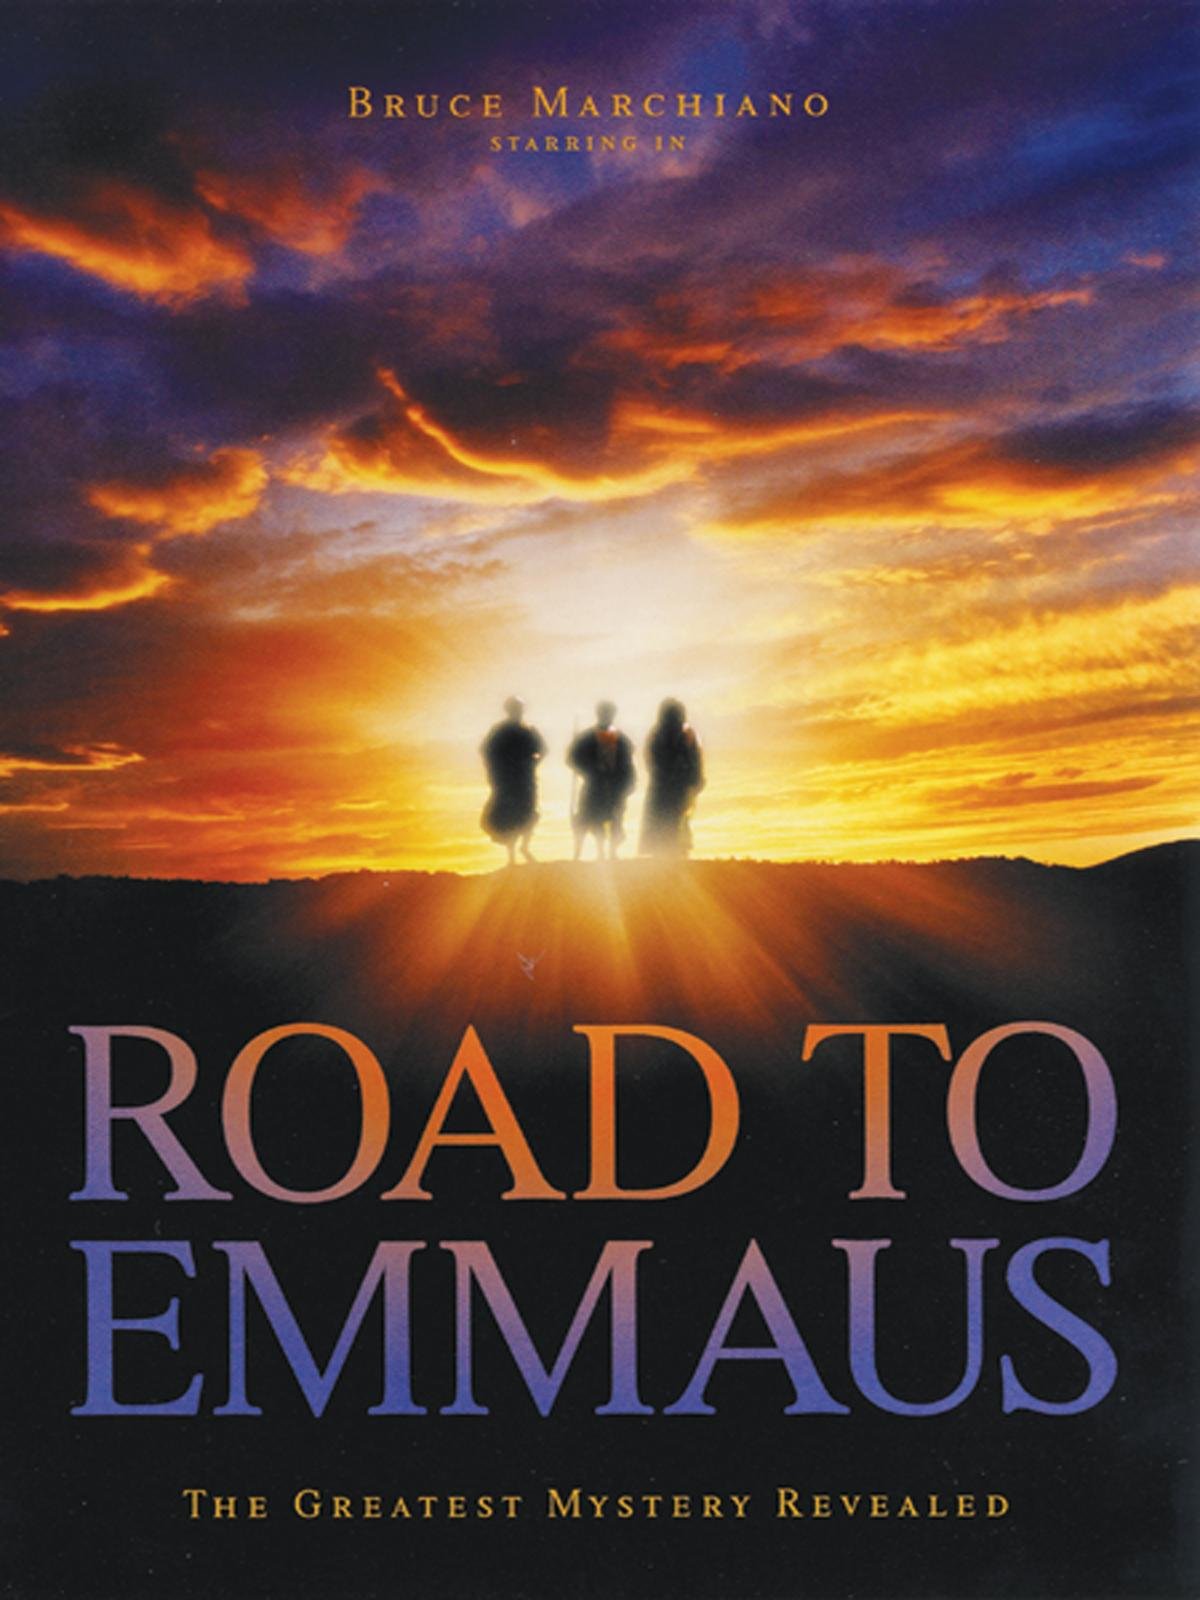 Road to Emmaus: The Greatest Mystery Revealed (2010) starring Bruce Marchiano